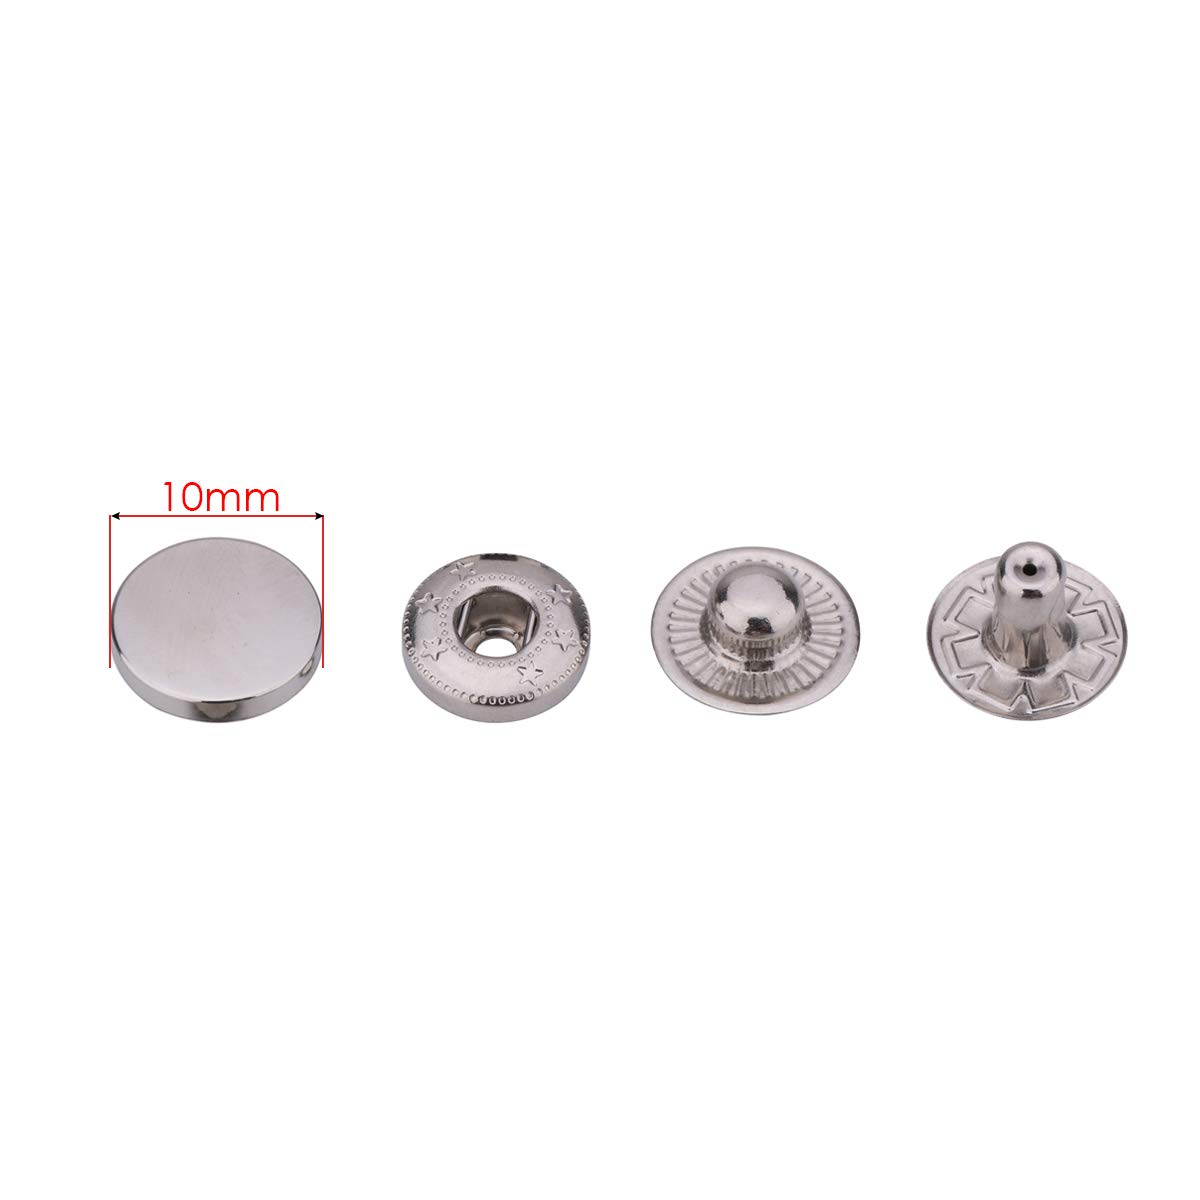 Trimming Shop 20mm S Spring Press Studs 4 Part, Durable and Lightweight,  Metal Snap Buttons Fasteners for Jackets, DIY Leathercrafts, Sewing  Clothing